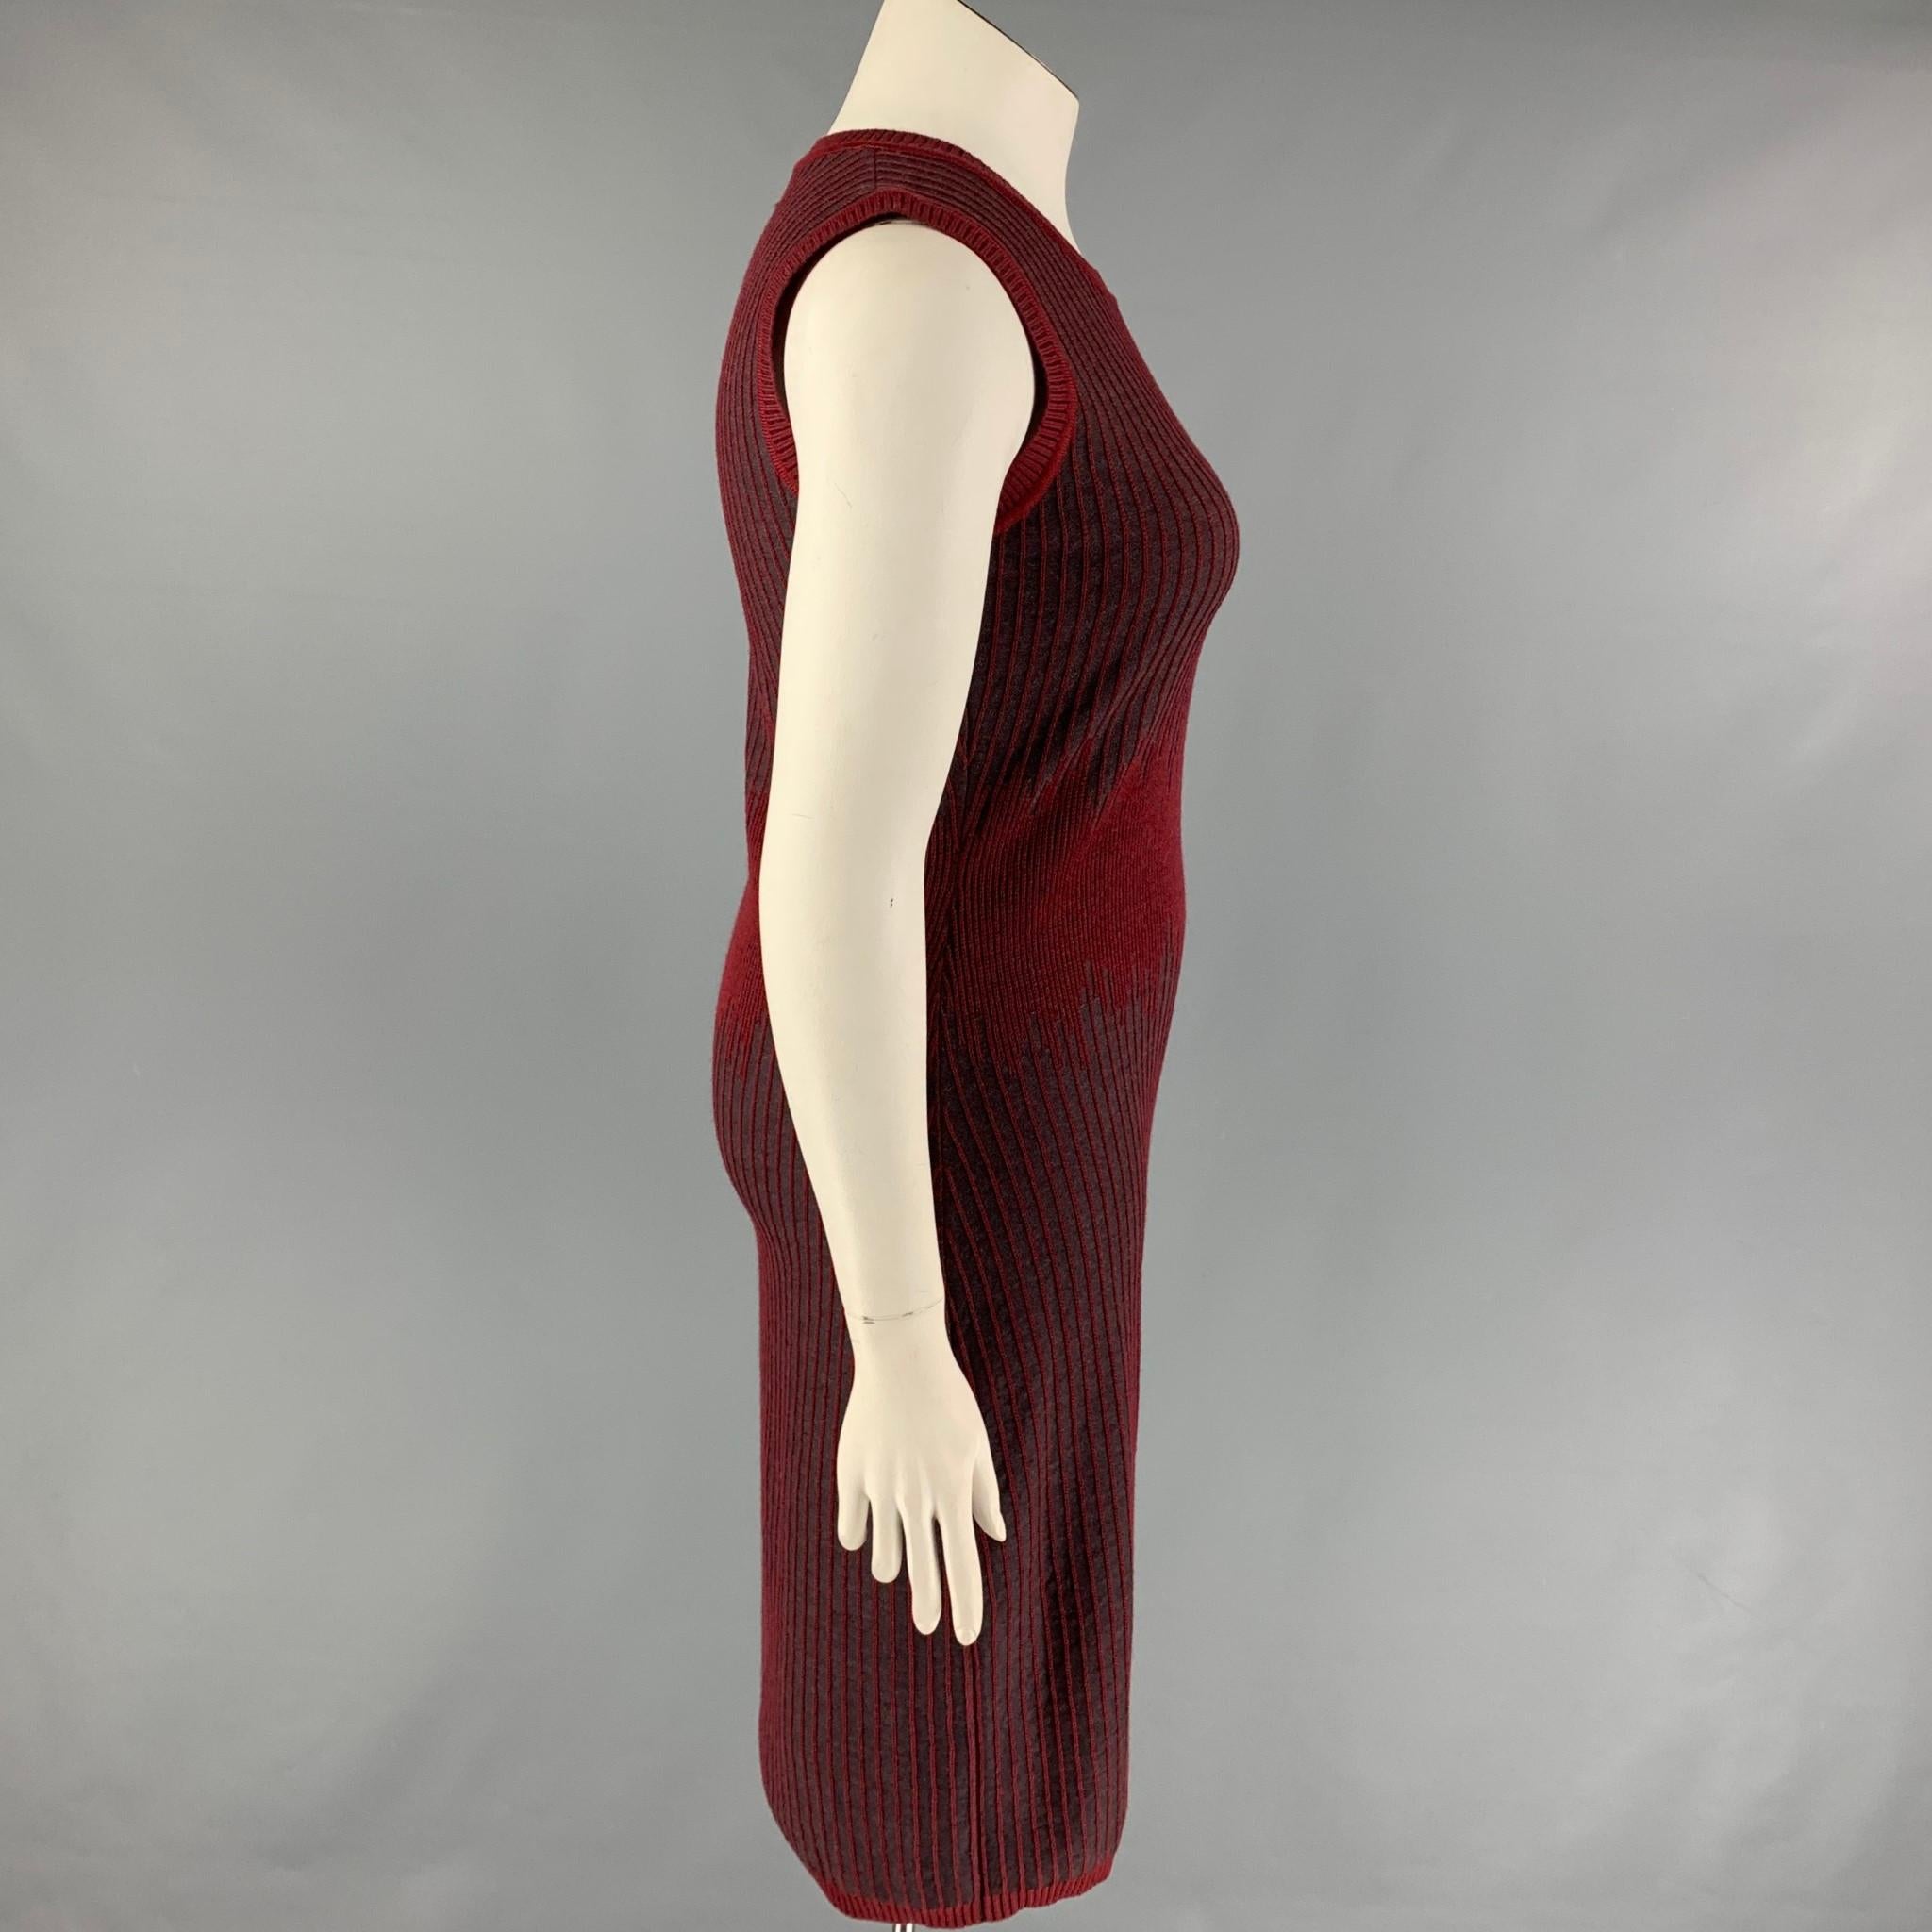 CAROLINA HERRERA dress comes in a burgundy & grey knitted stripe wool  featuring a sheath style, sleeveless, and a ribbed hem. Made in Italy. 

New With Tags. 
Marked: L
Original Retail Price: $1,390.00

Measurements:

Shoulder: 15 in.
Bust: 35